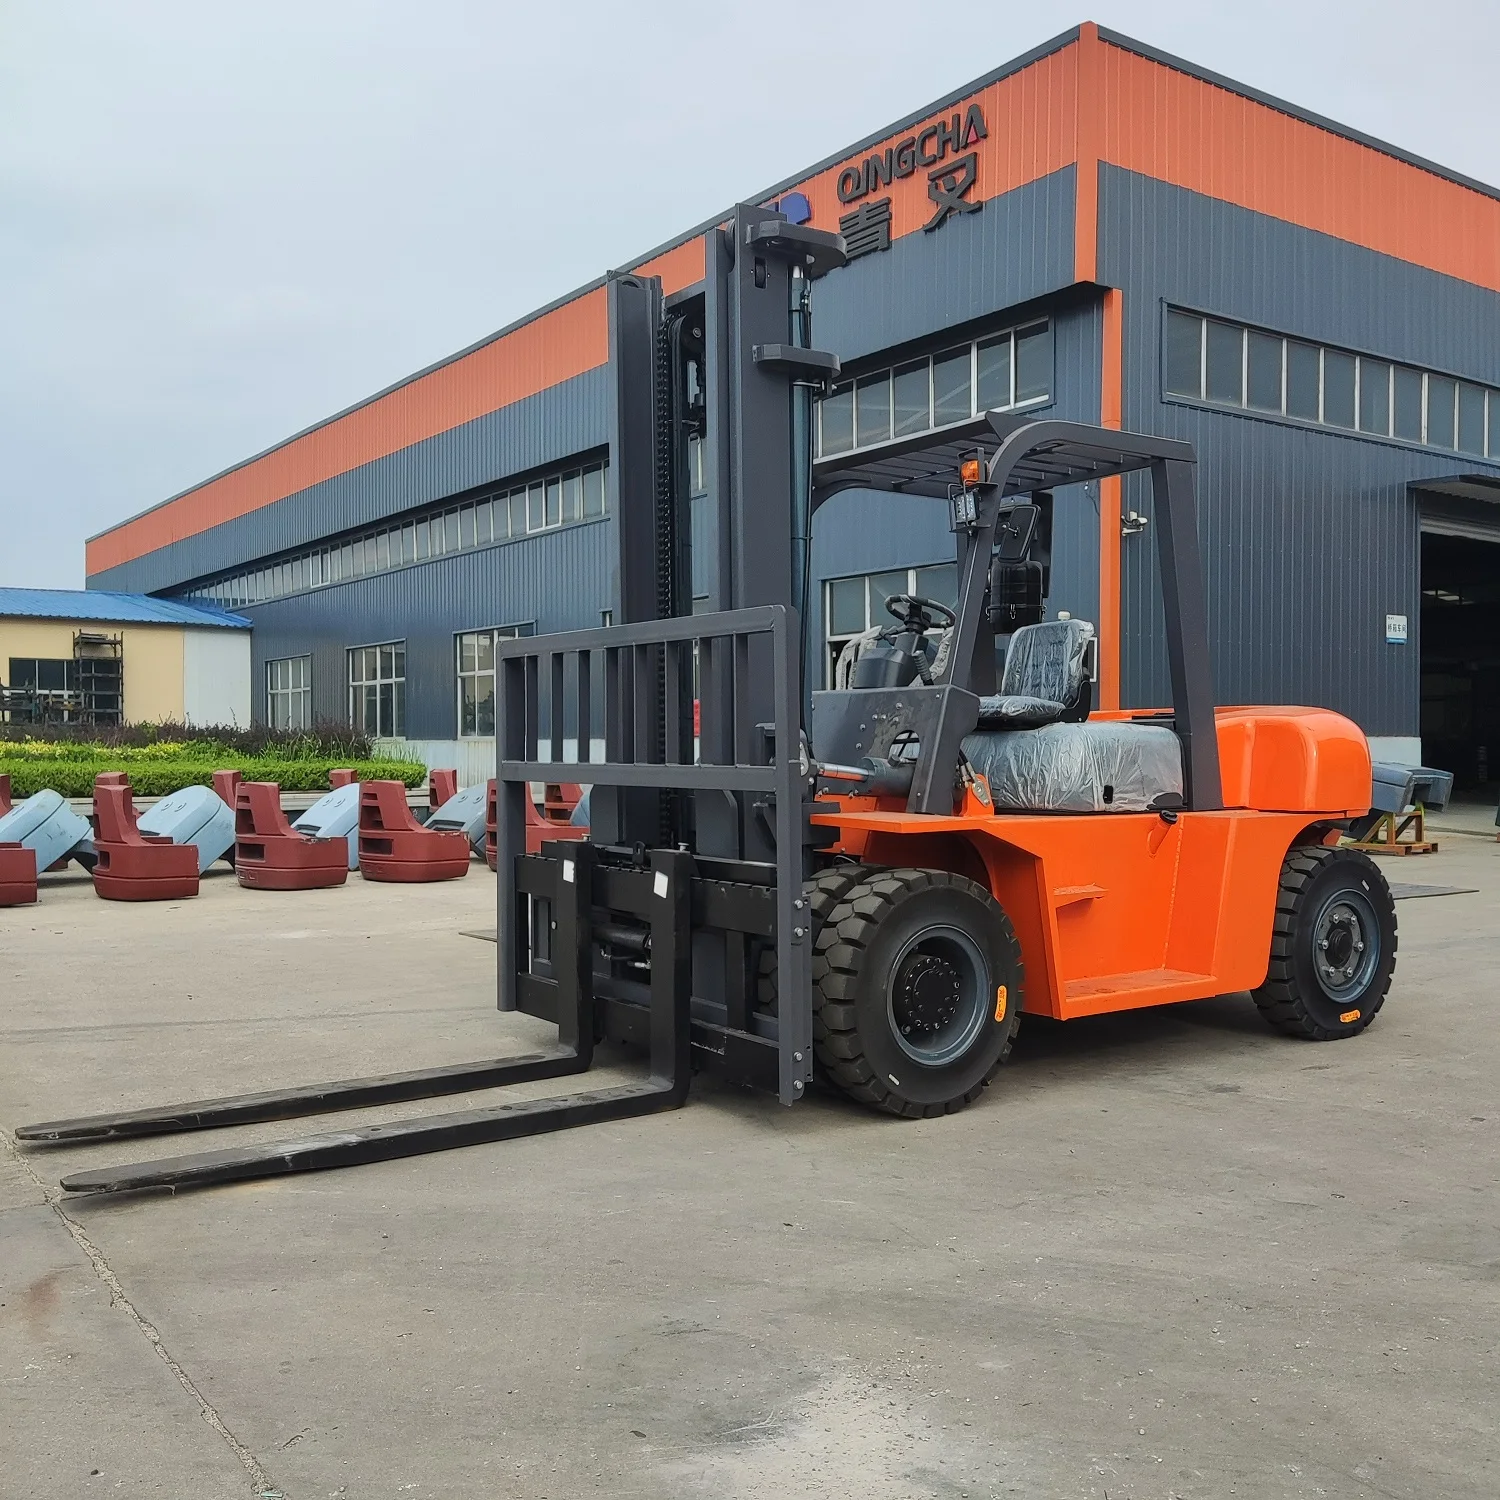 Multifunction Diesel Off Road Drum new forklift Truck Machines Forklift Max Power Engine Technical hand fork lifter